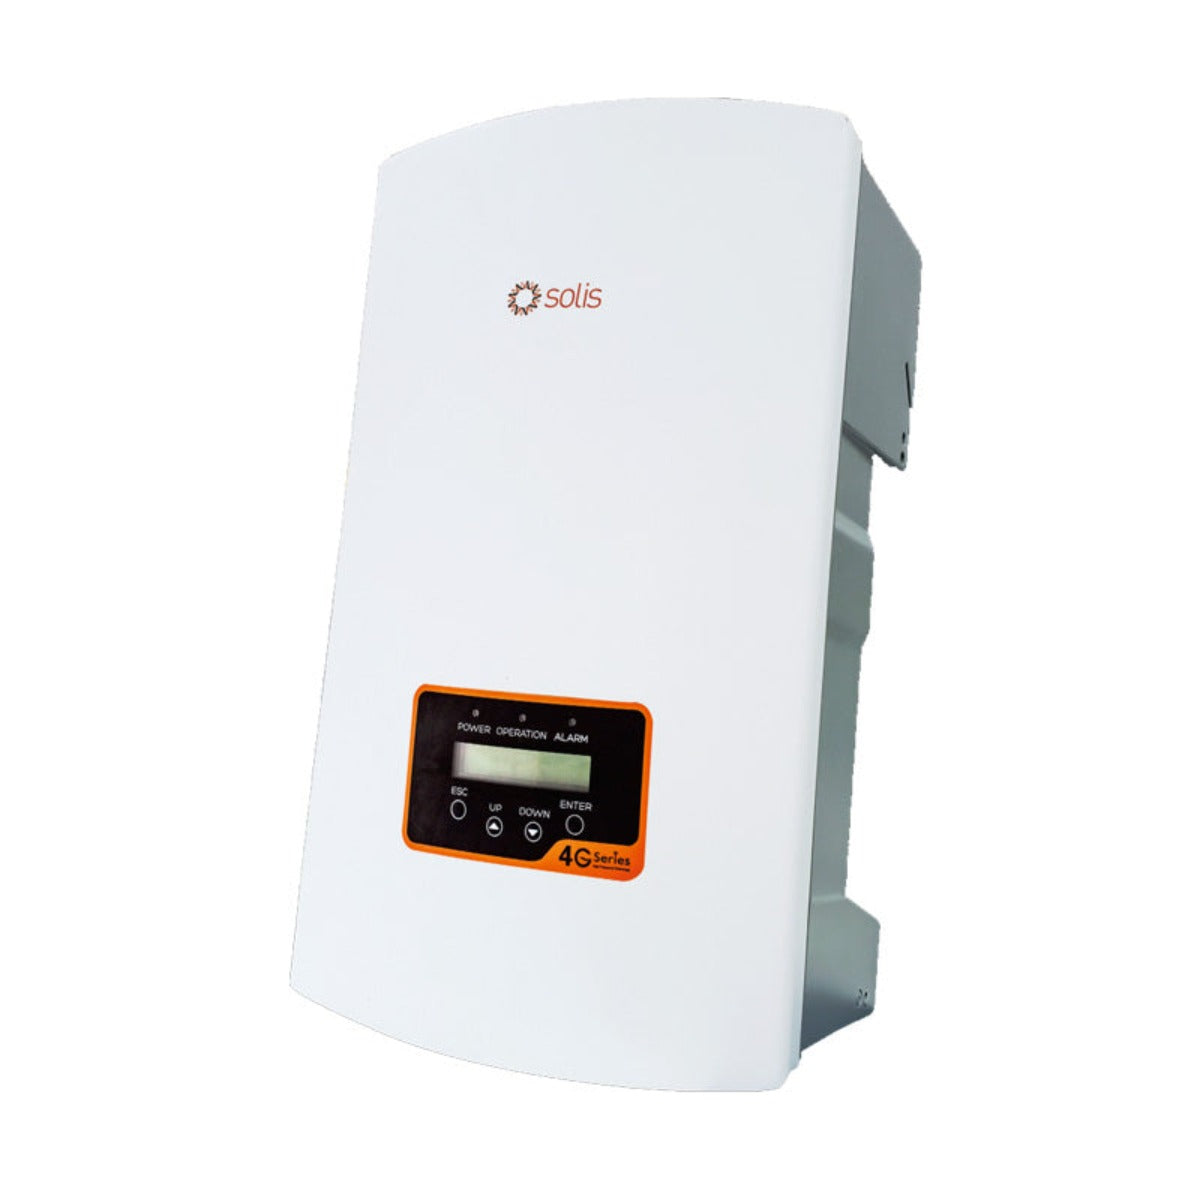 Solis 4G 15.0kW Dual MPPT 3-Phase Grid Tie Inverter - Sustainable.co.za